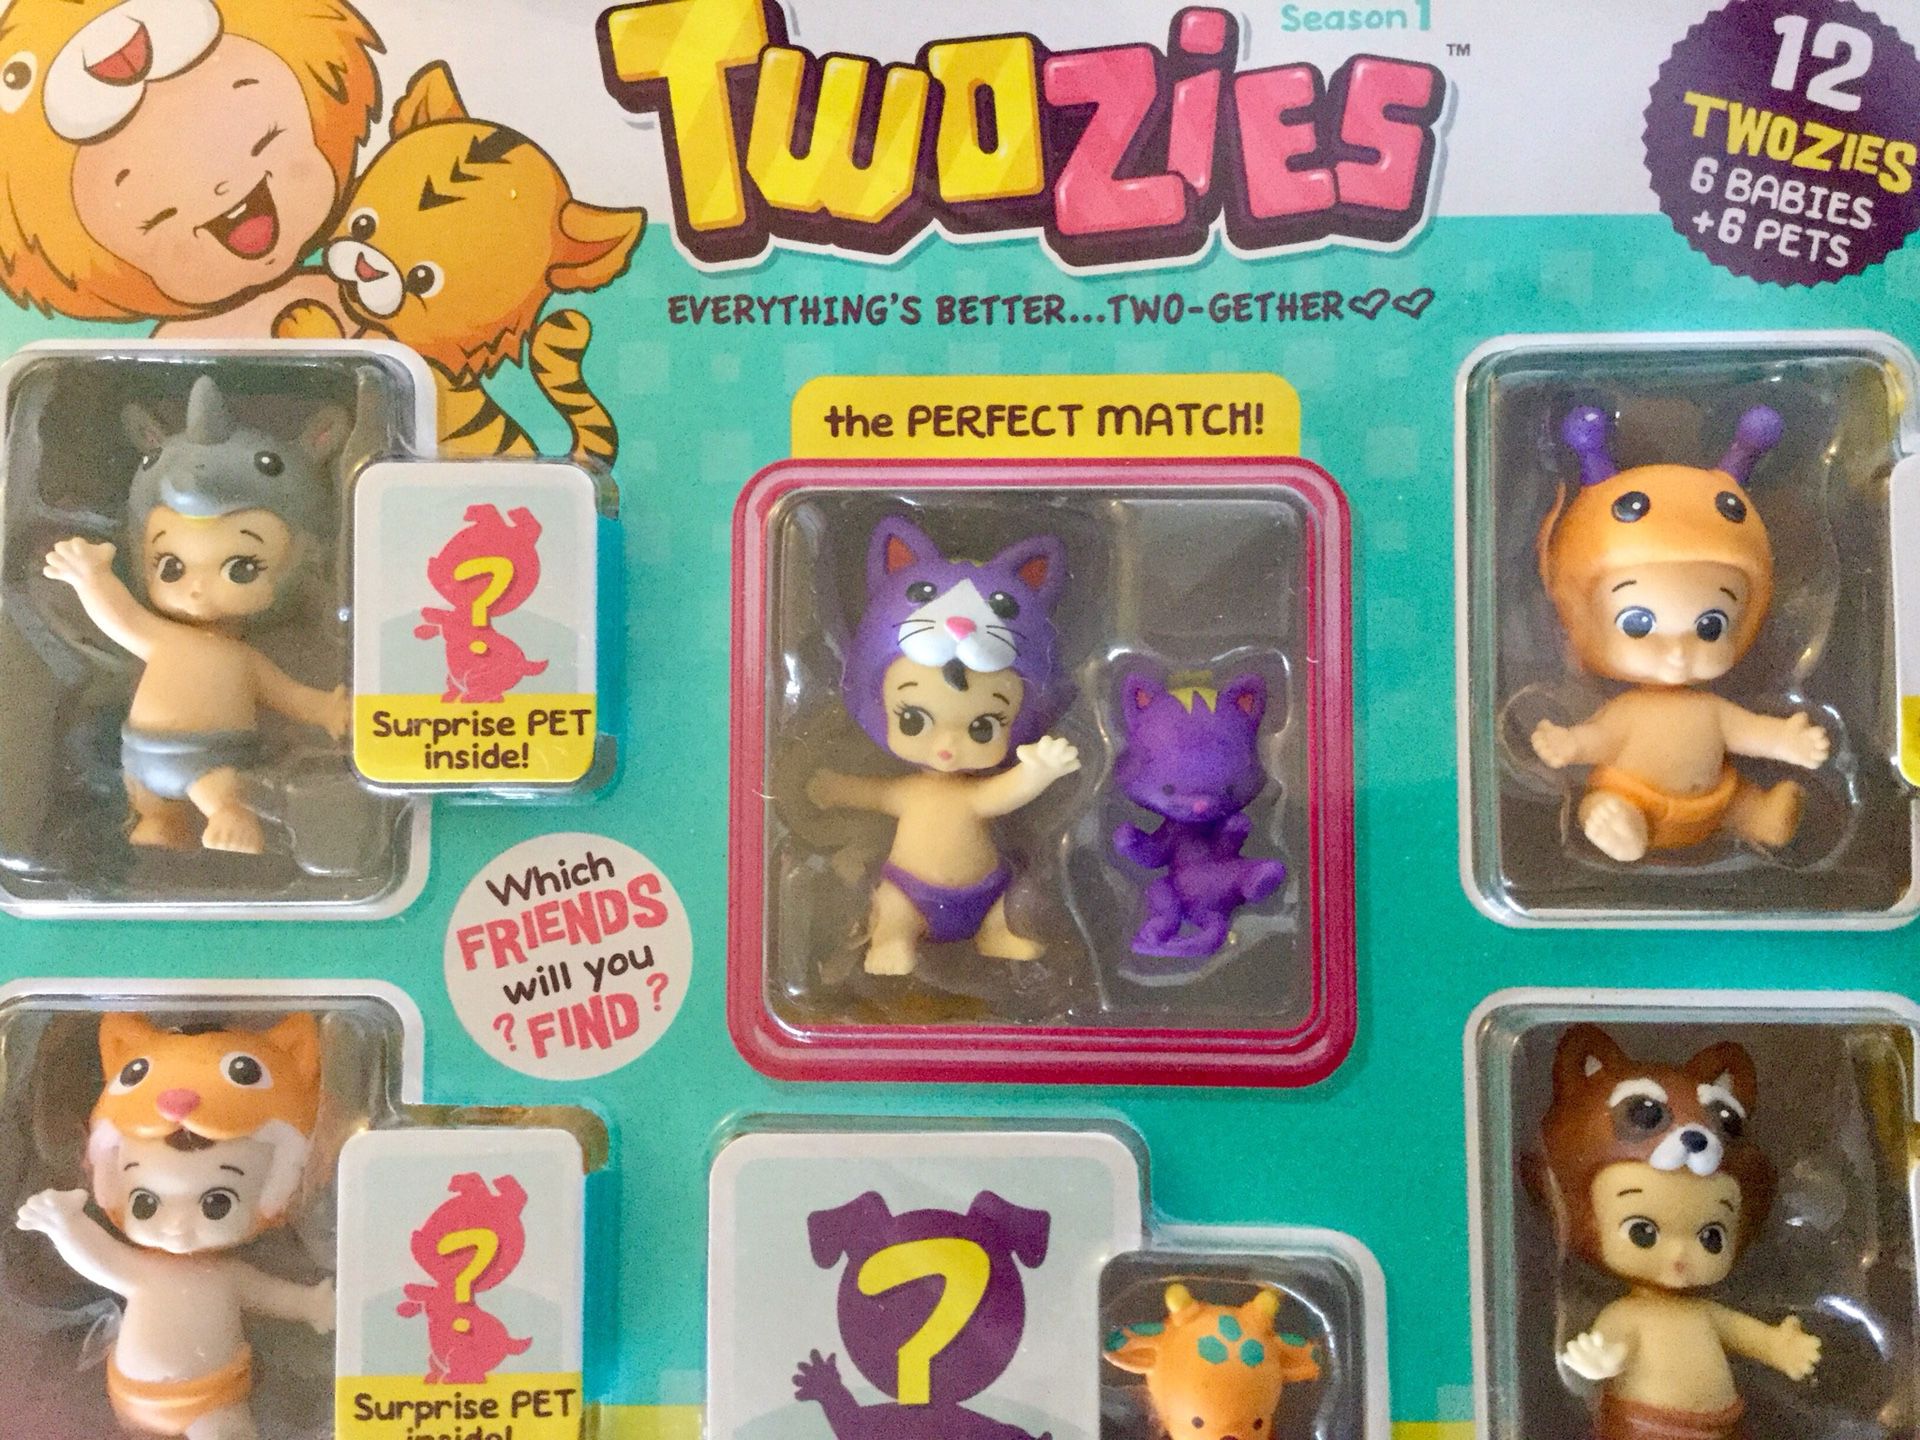 12. Twozies * Super cute collectable 6 Babies and 6 Pets / love Toys and collectables 👶🏼❤️🦁🐶